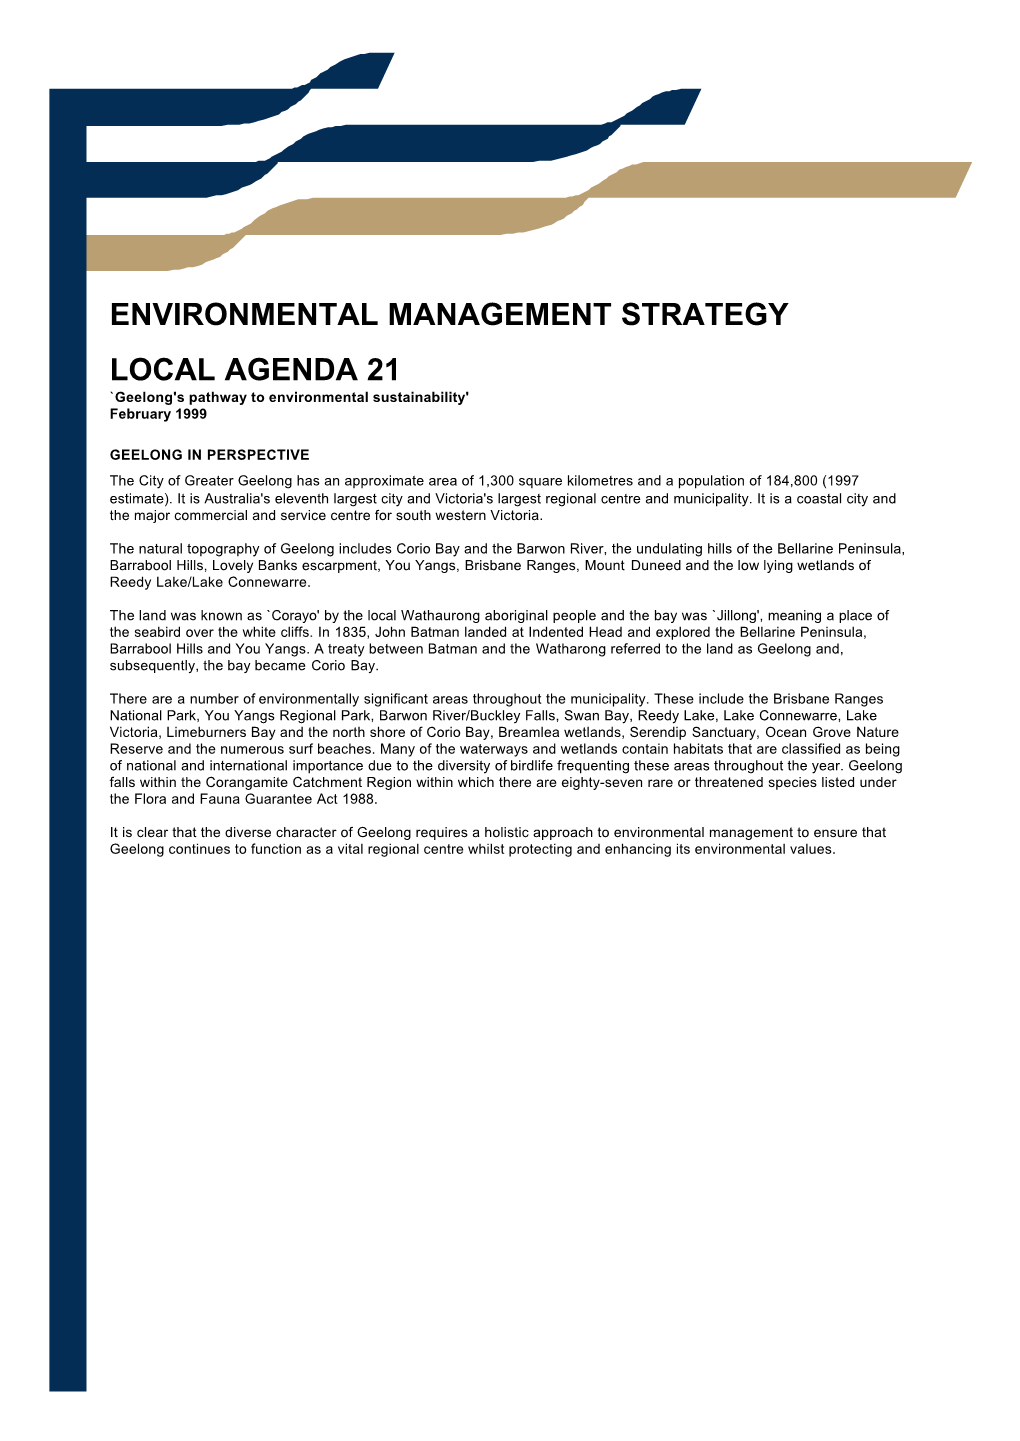 ENVIRONMENTAL MANAGEMENT STRATEGY LOCAL AGENDA 21 `Geelong's Pathway to Environmental Sustainability' February 1999